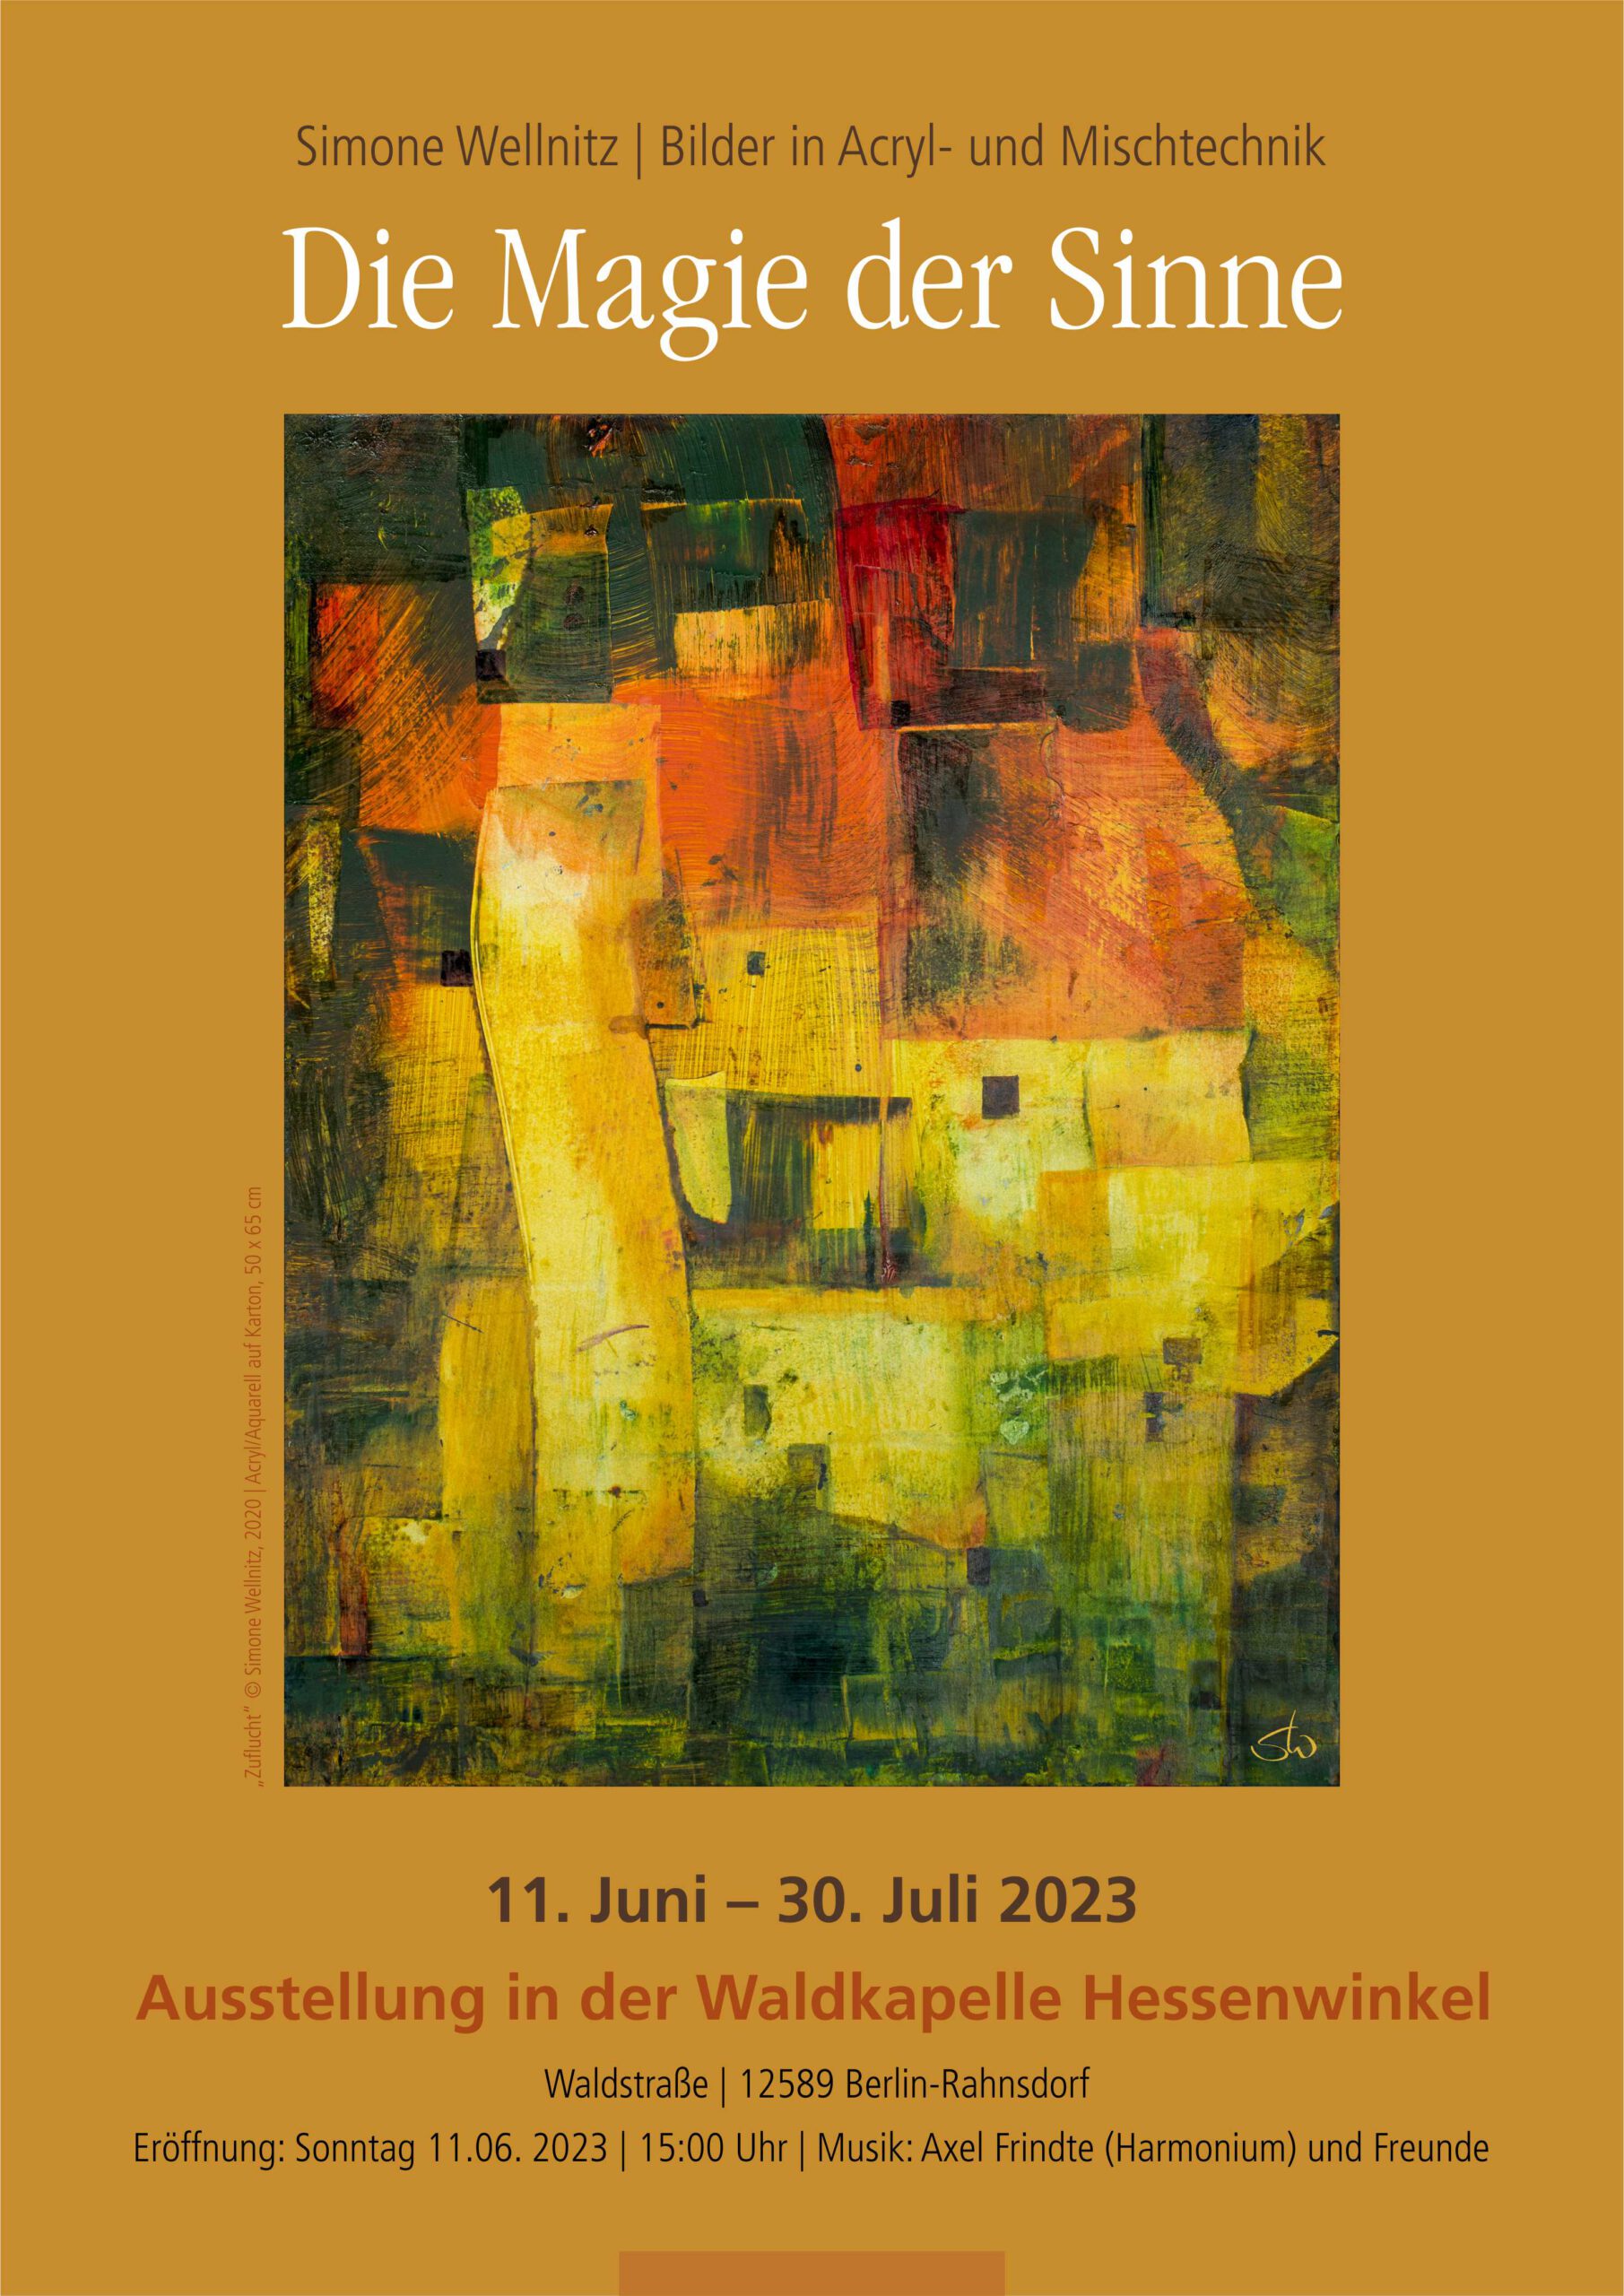 You are currently viewing Vernissage Ausstellung Waldkapelle 11. Juni 2023